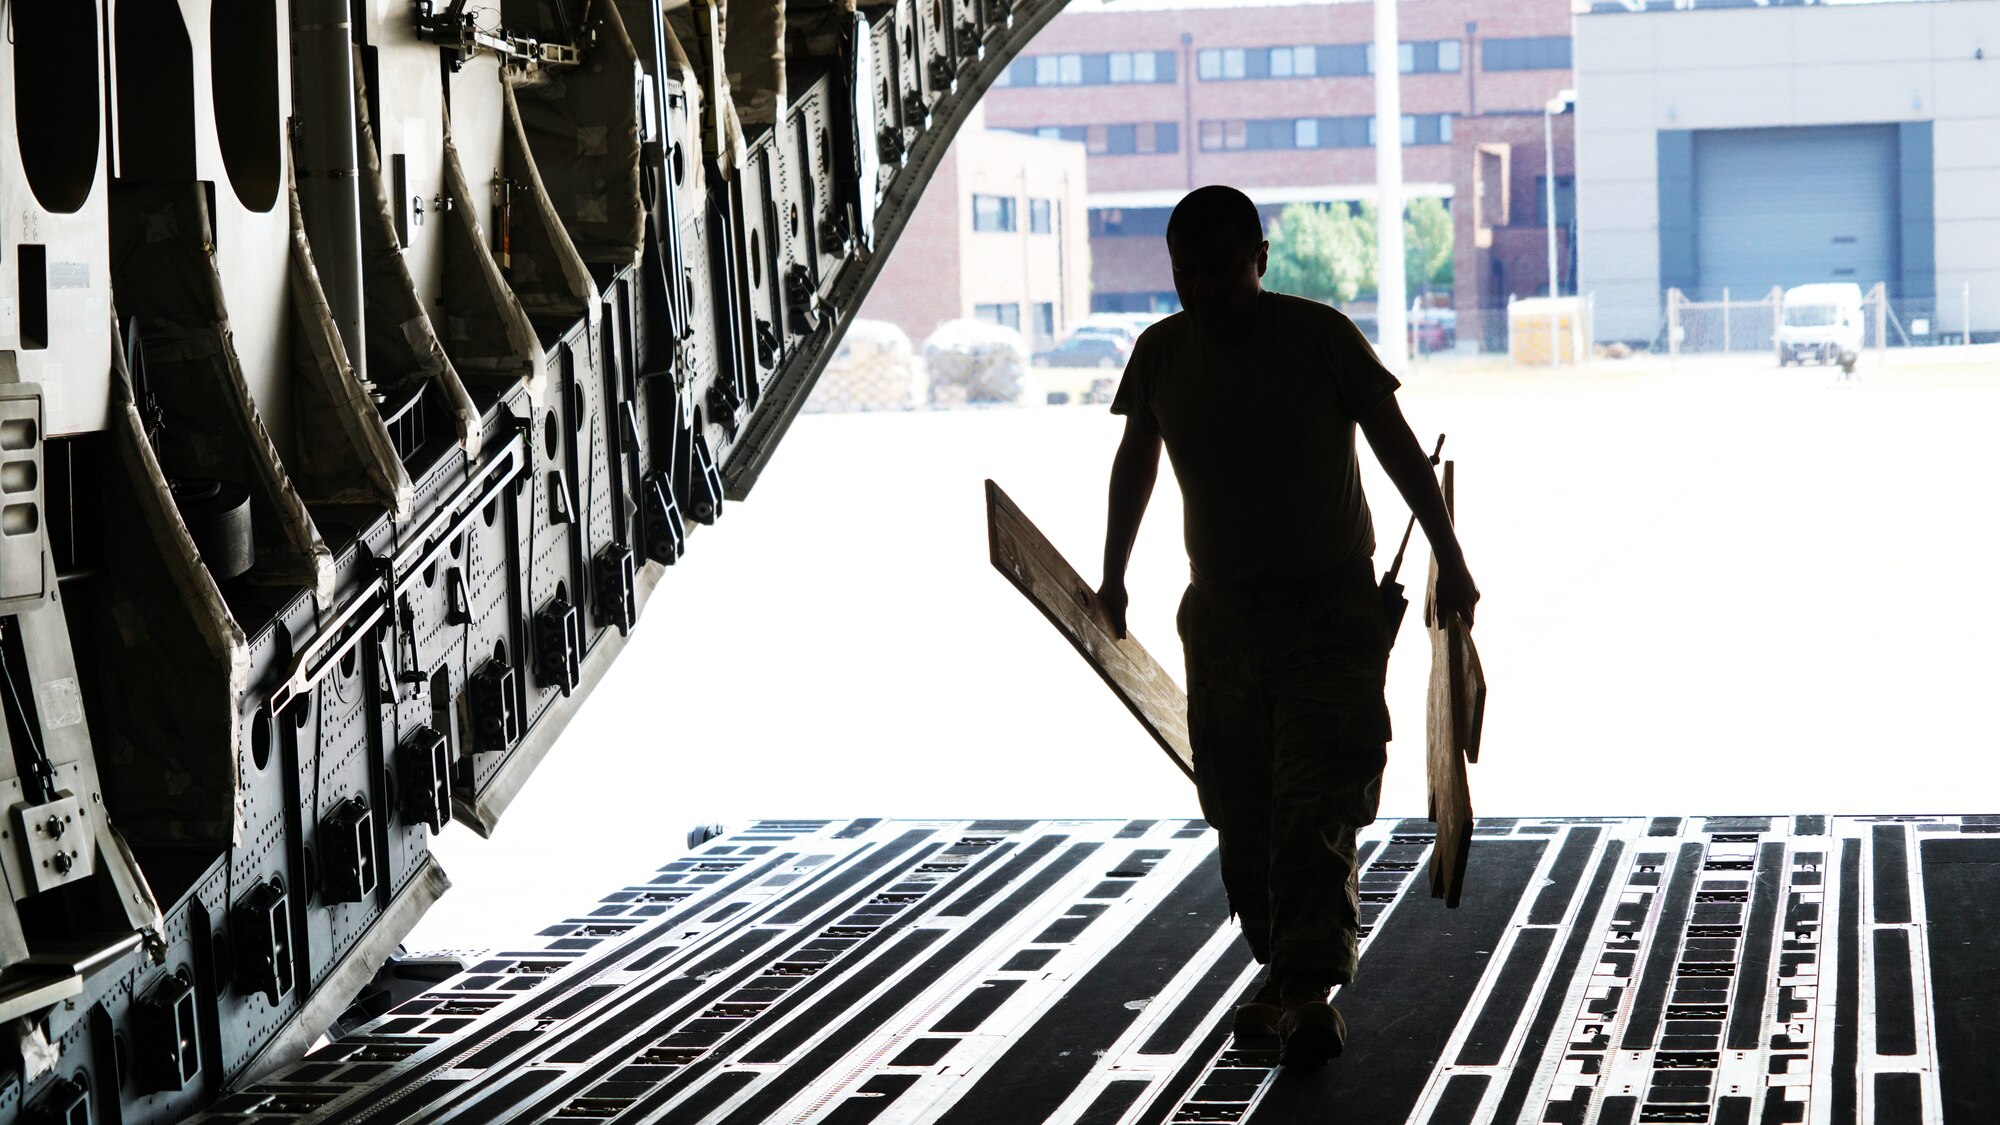 A photograph silhouette looking towards and out the back of a military C-17 aircraft as a U.S. Air Force Airman carrying two pieces of equipment walks up the ramp.